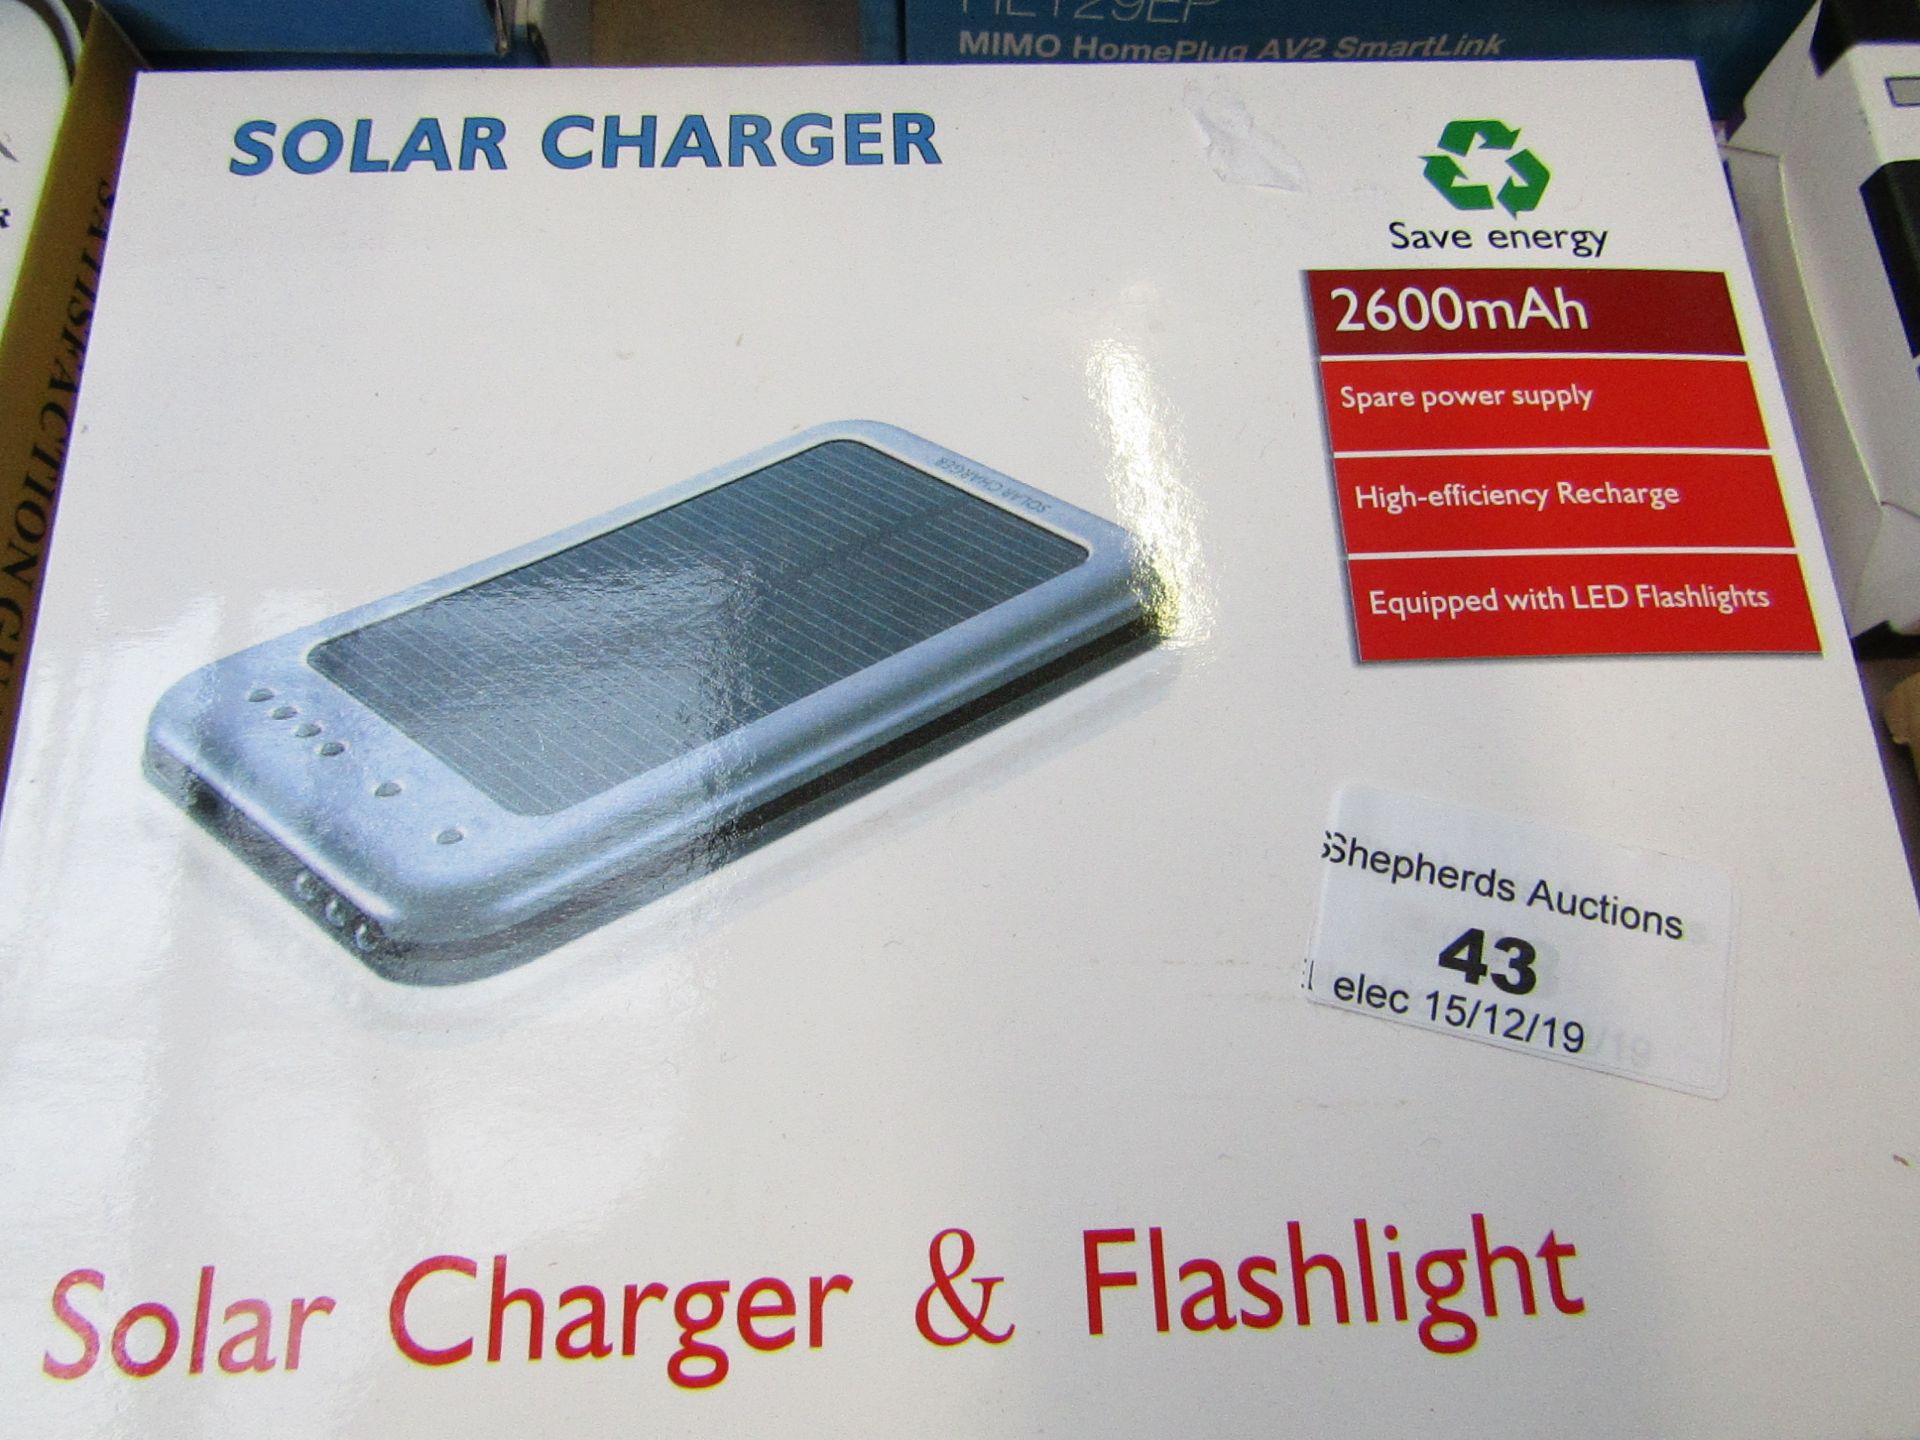 Solar charger & flashlight 2600mAh, untested and boxed.